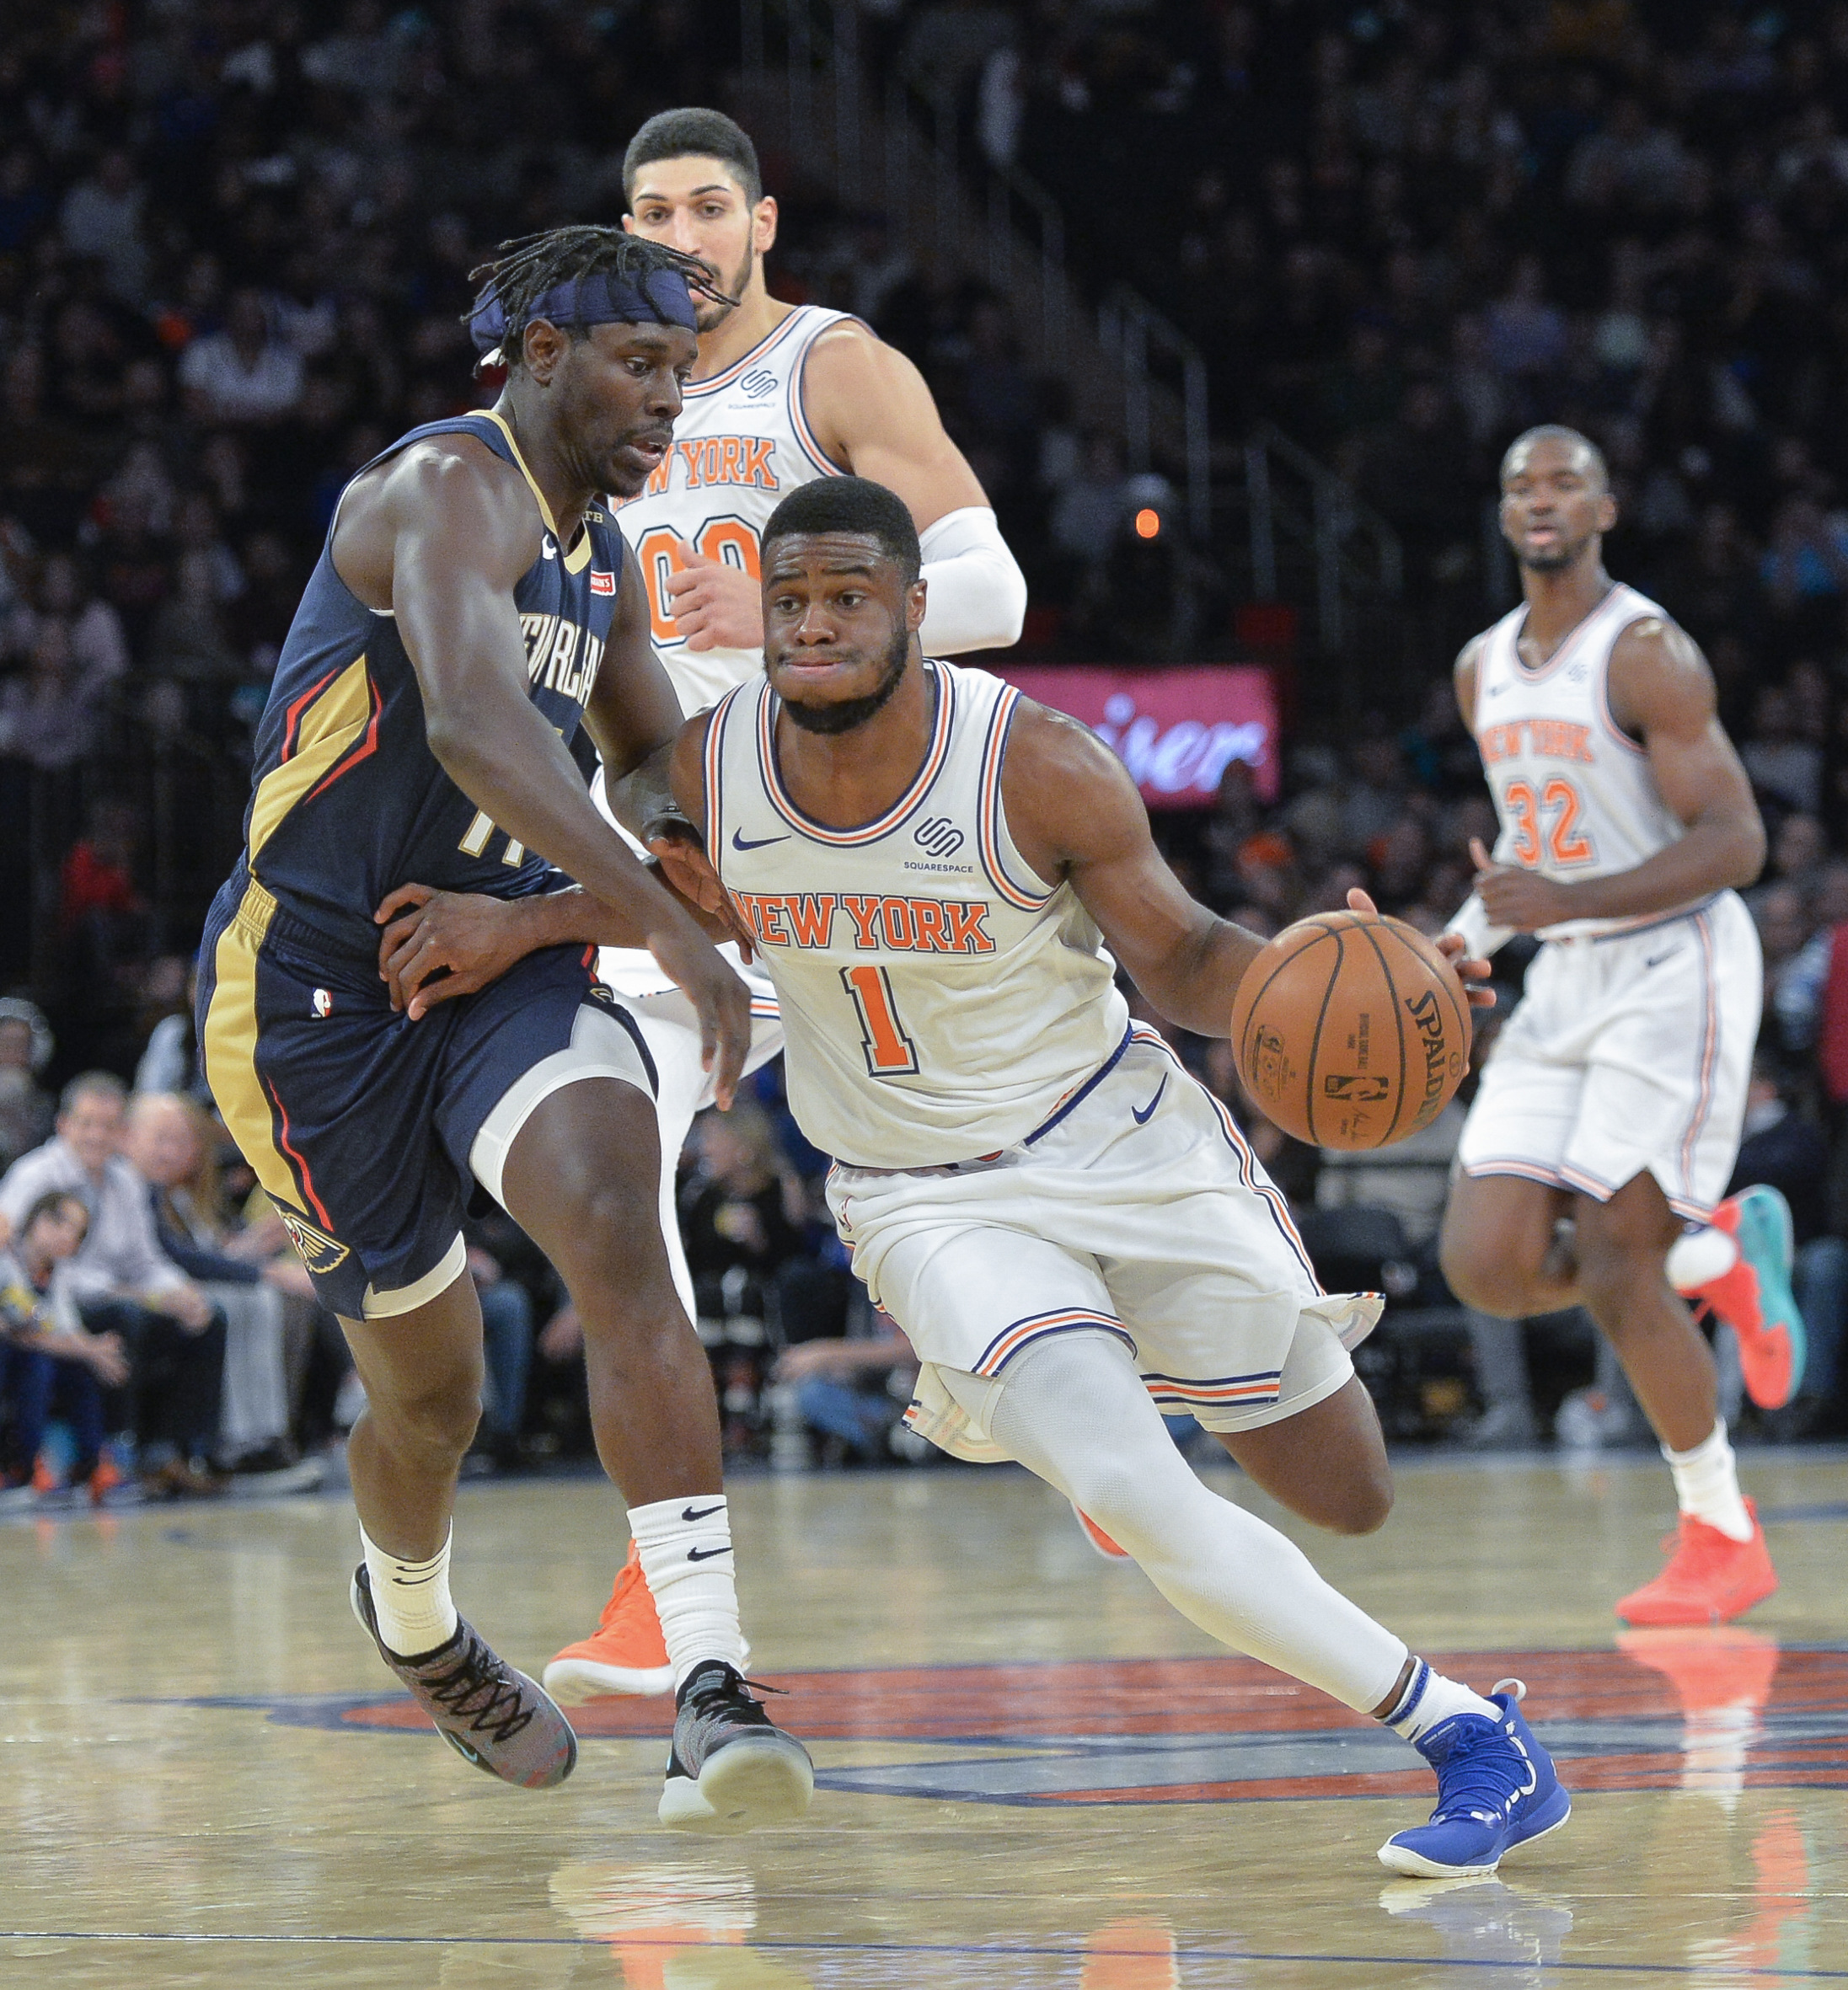 Knicks beat Pelicans, win consecutive games for first time